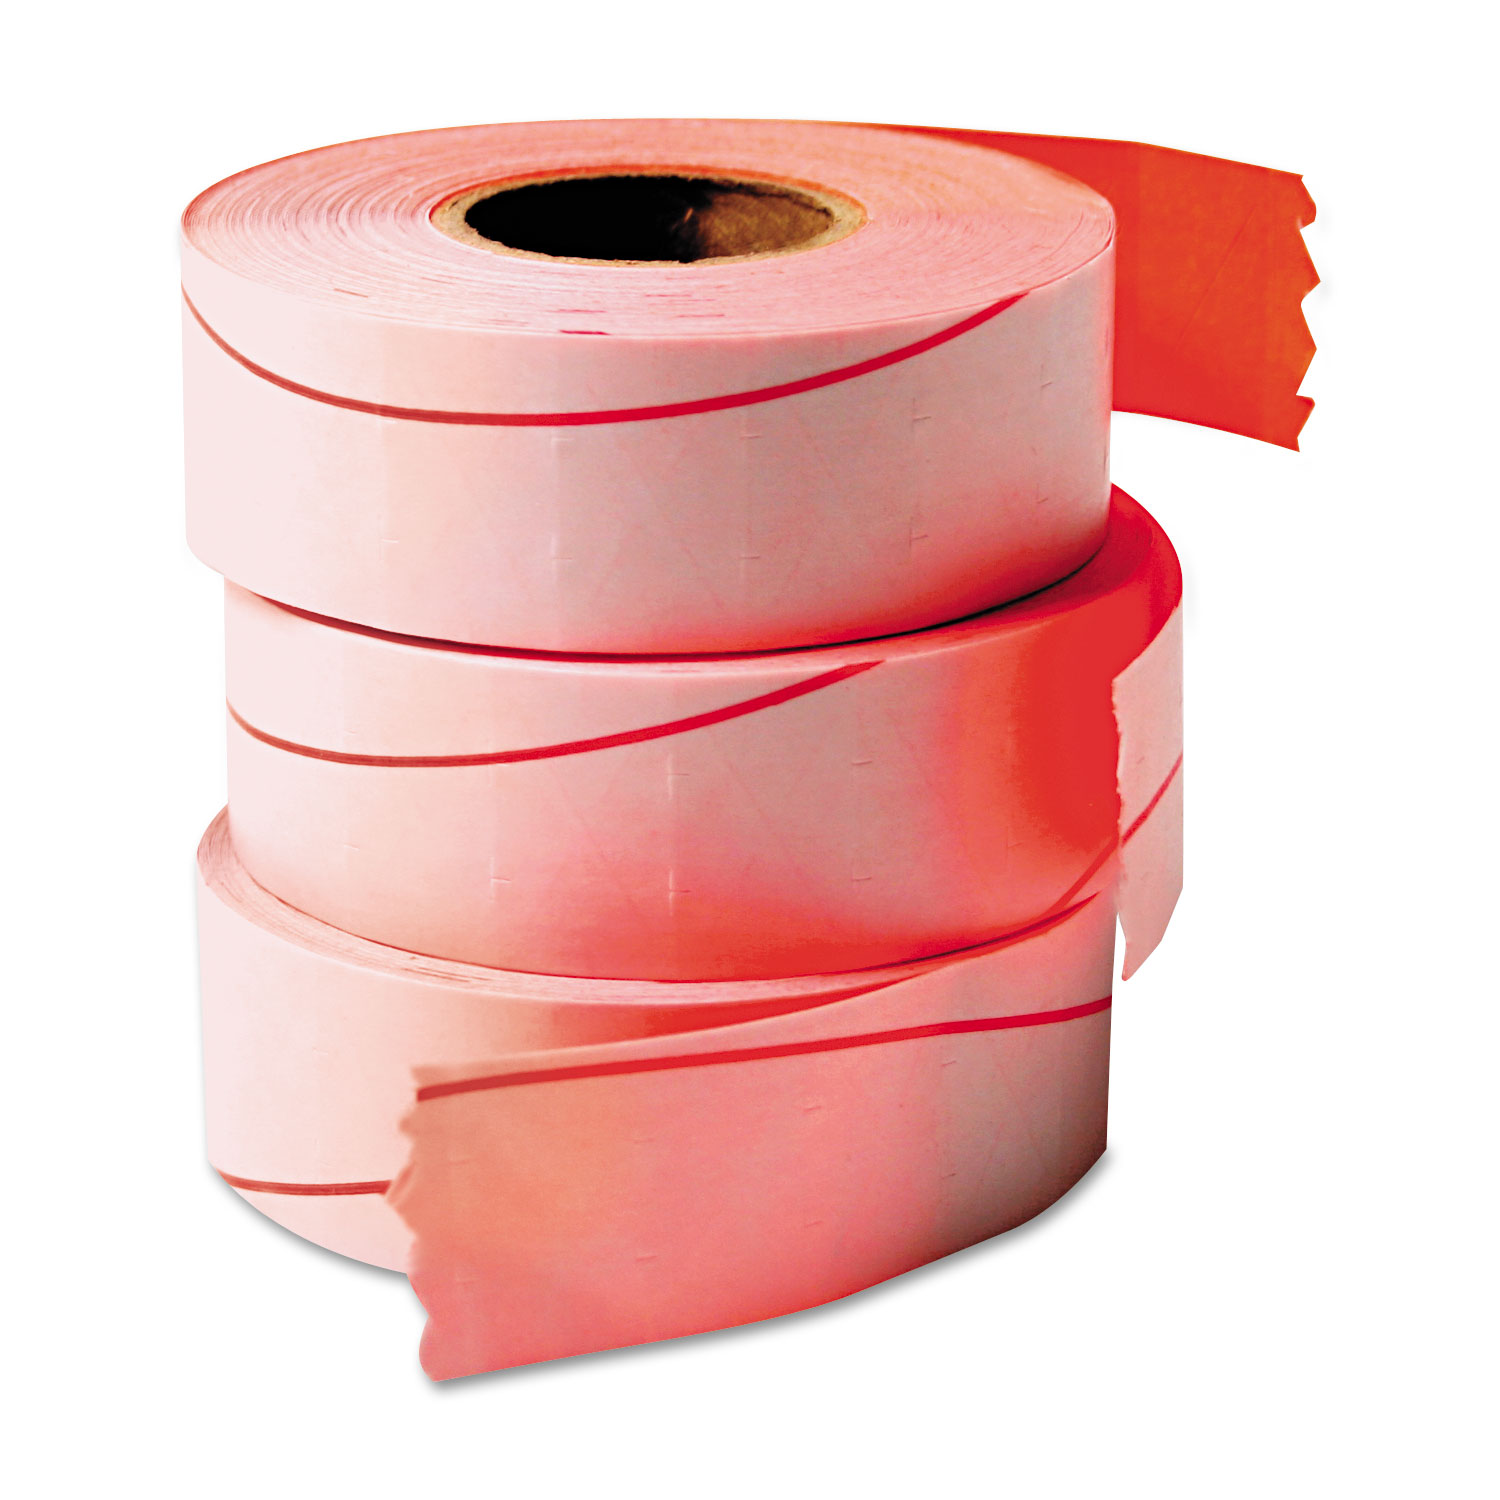 One-Line Pricemarker Labels, 7/16 x 13/16, Fluor. Red, 1200/Roll, 3 Rolls/Box